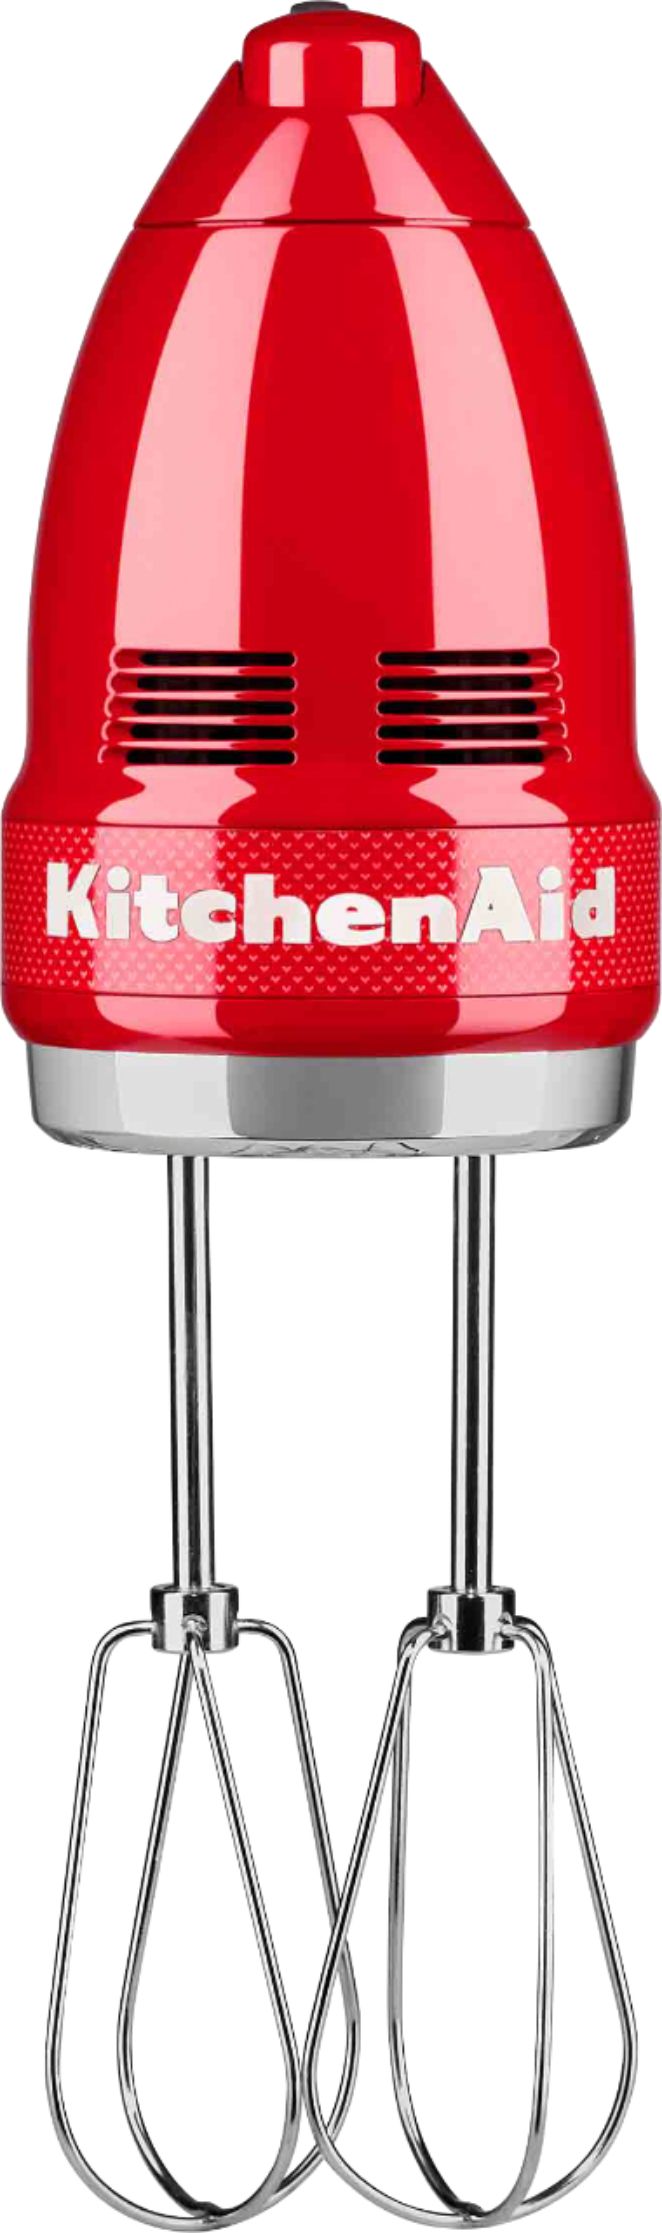 KitchenAid KHM7210QHSD 100 Year Limited Edition Queen of Hearts 7-Speed